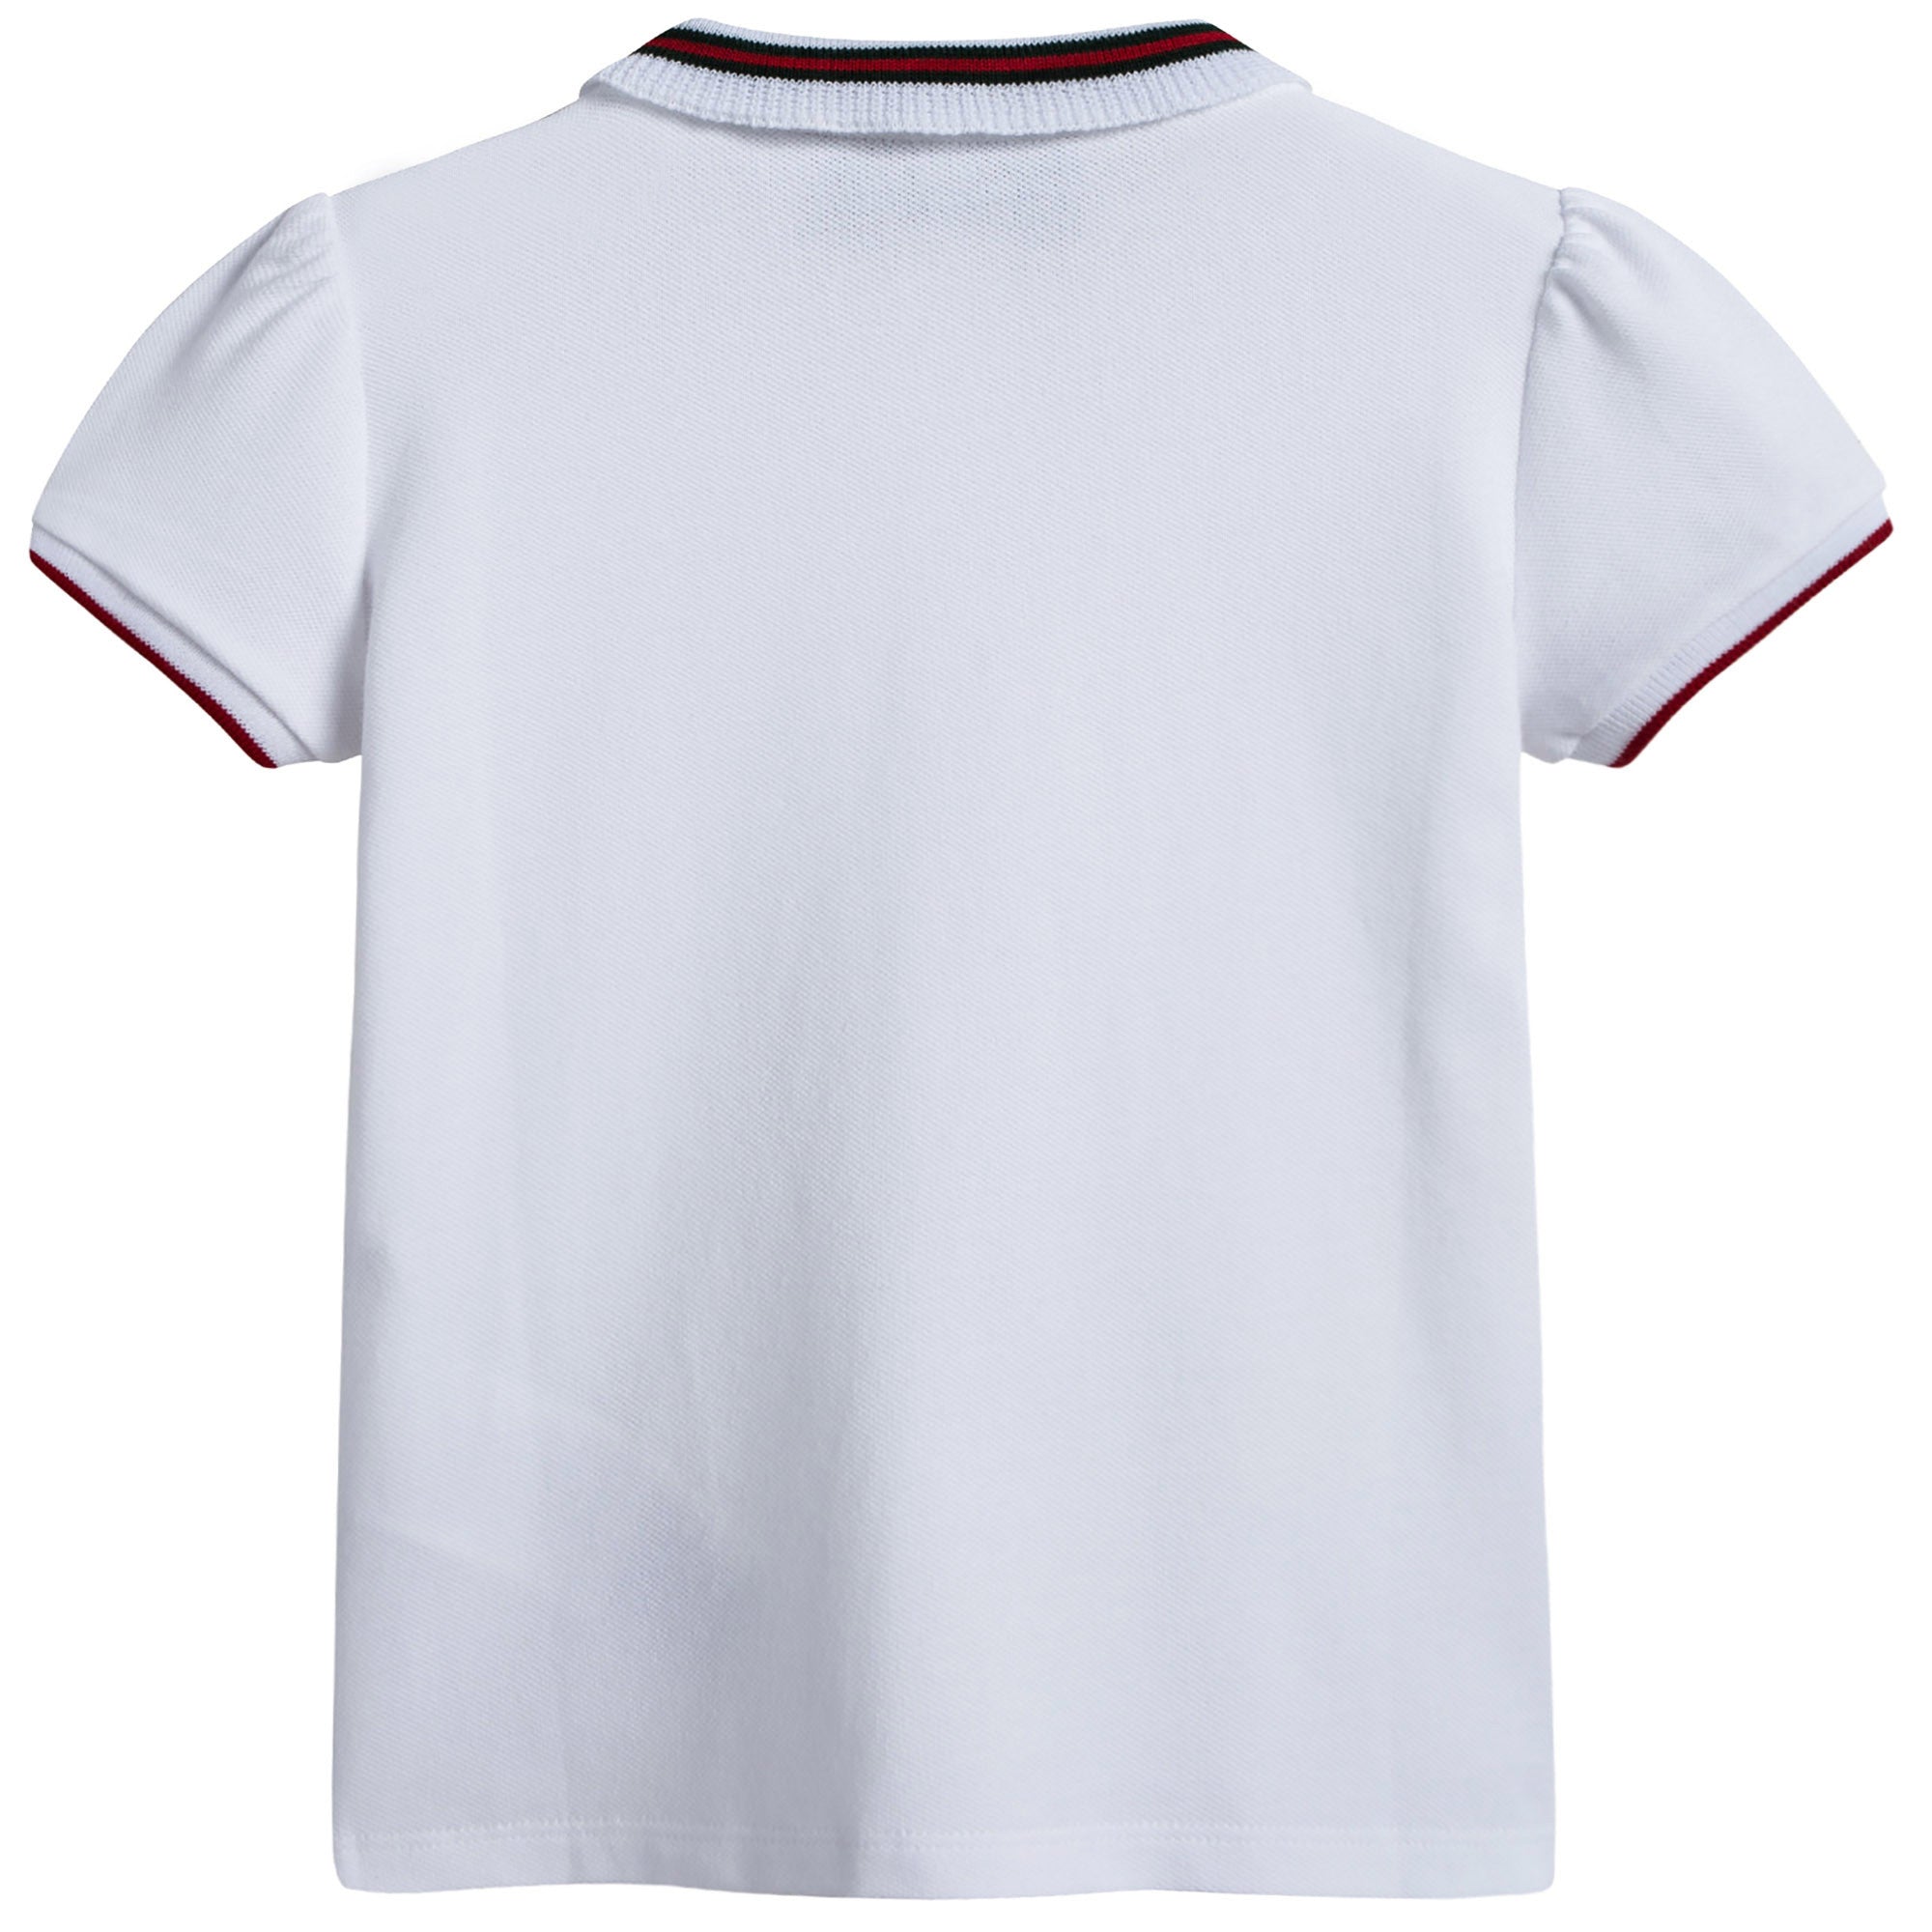 Girls White Polo Shirt with Trims